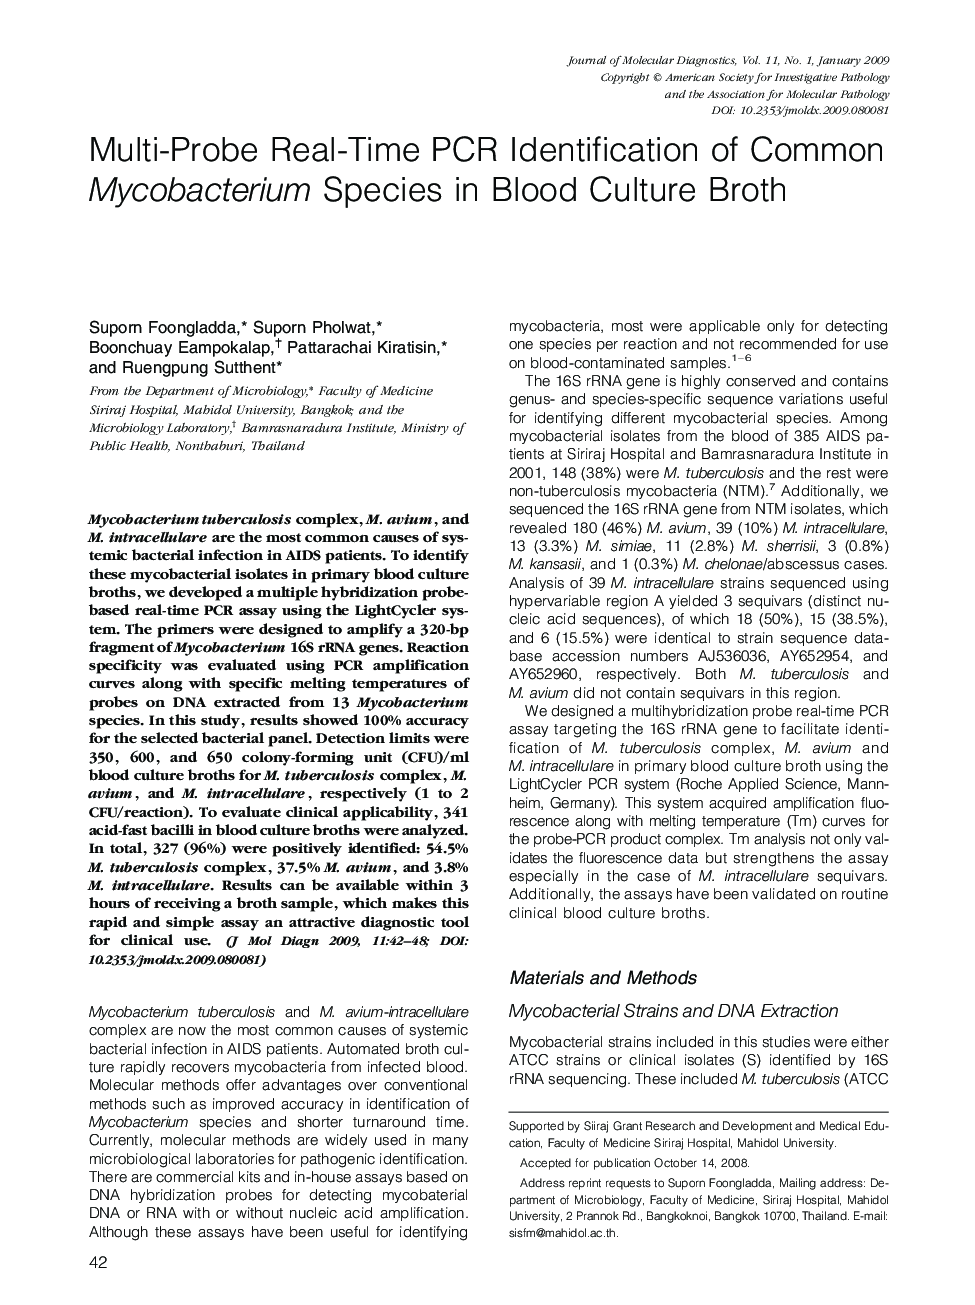 Multi-Probe Real-Time PCR Identification of Common Mycobacterium Species in Blood Culture Broth 